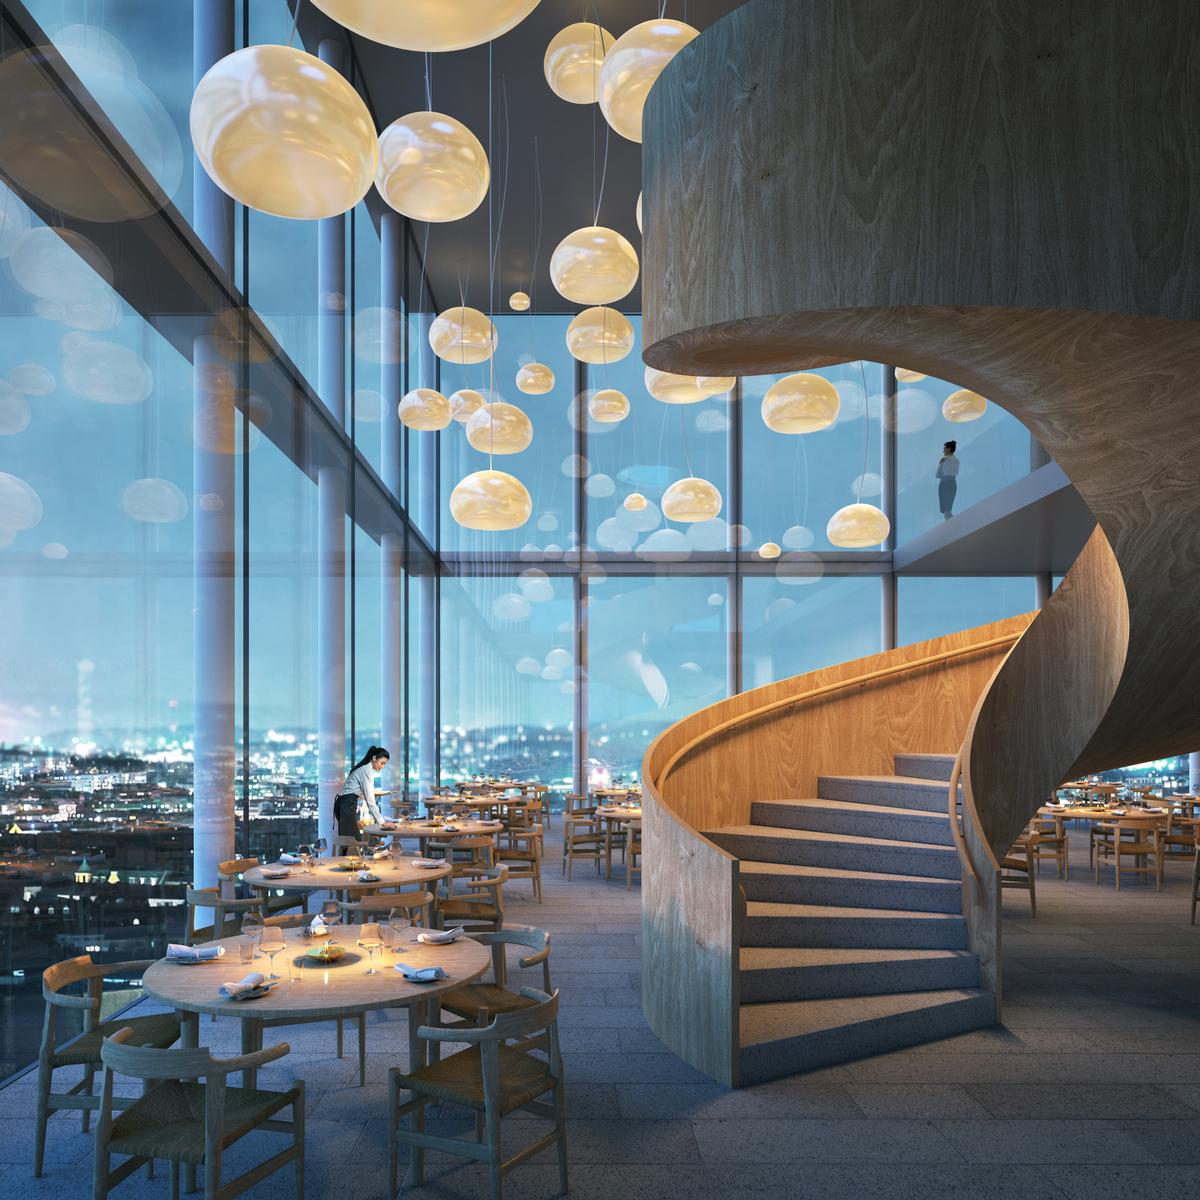 Restaurants and bars in the upper four levels of the tower will take advantage of its views / Tham & Videgård Arkitekter